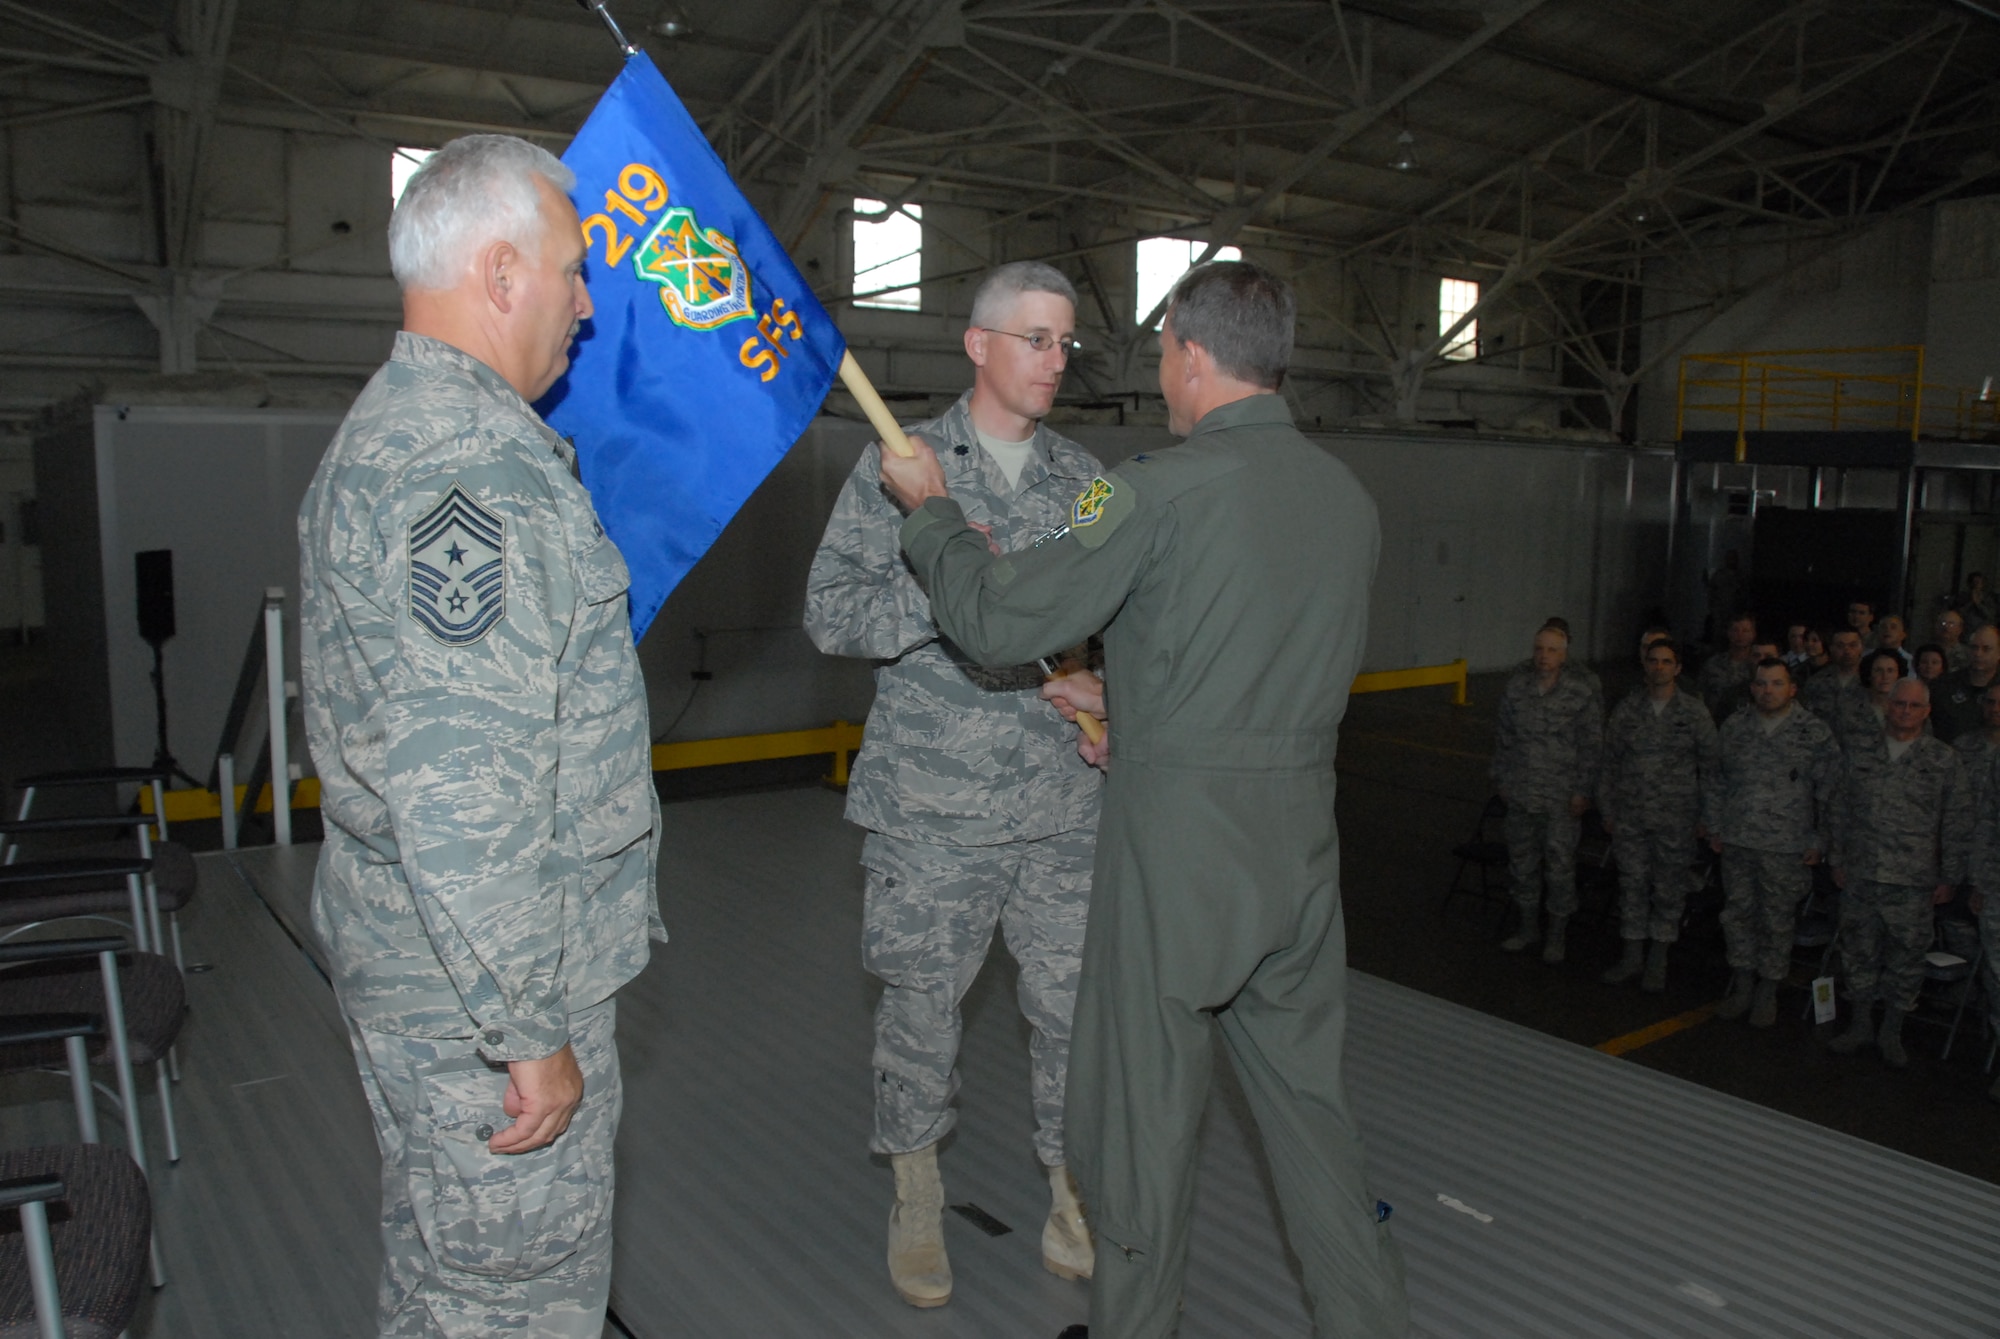 Col. Robert Becklund, 119th Wing Commander, hands the 219th Security Forces Squadron flag to Lt.Col. Tad Schauer, 219th SFS Commander, as CMSgt Bradley Childs, 119th Wing Command Chief stands at attention during an activation ceremony for the new squadron conducted at Minot Air Force Base in N.D. on Oct. 18.